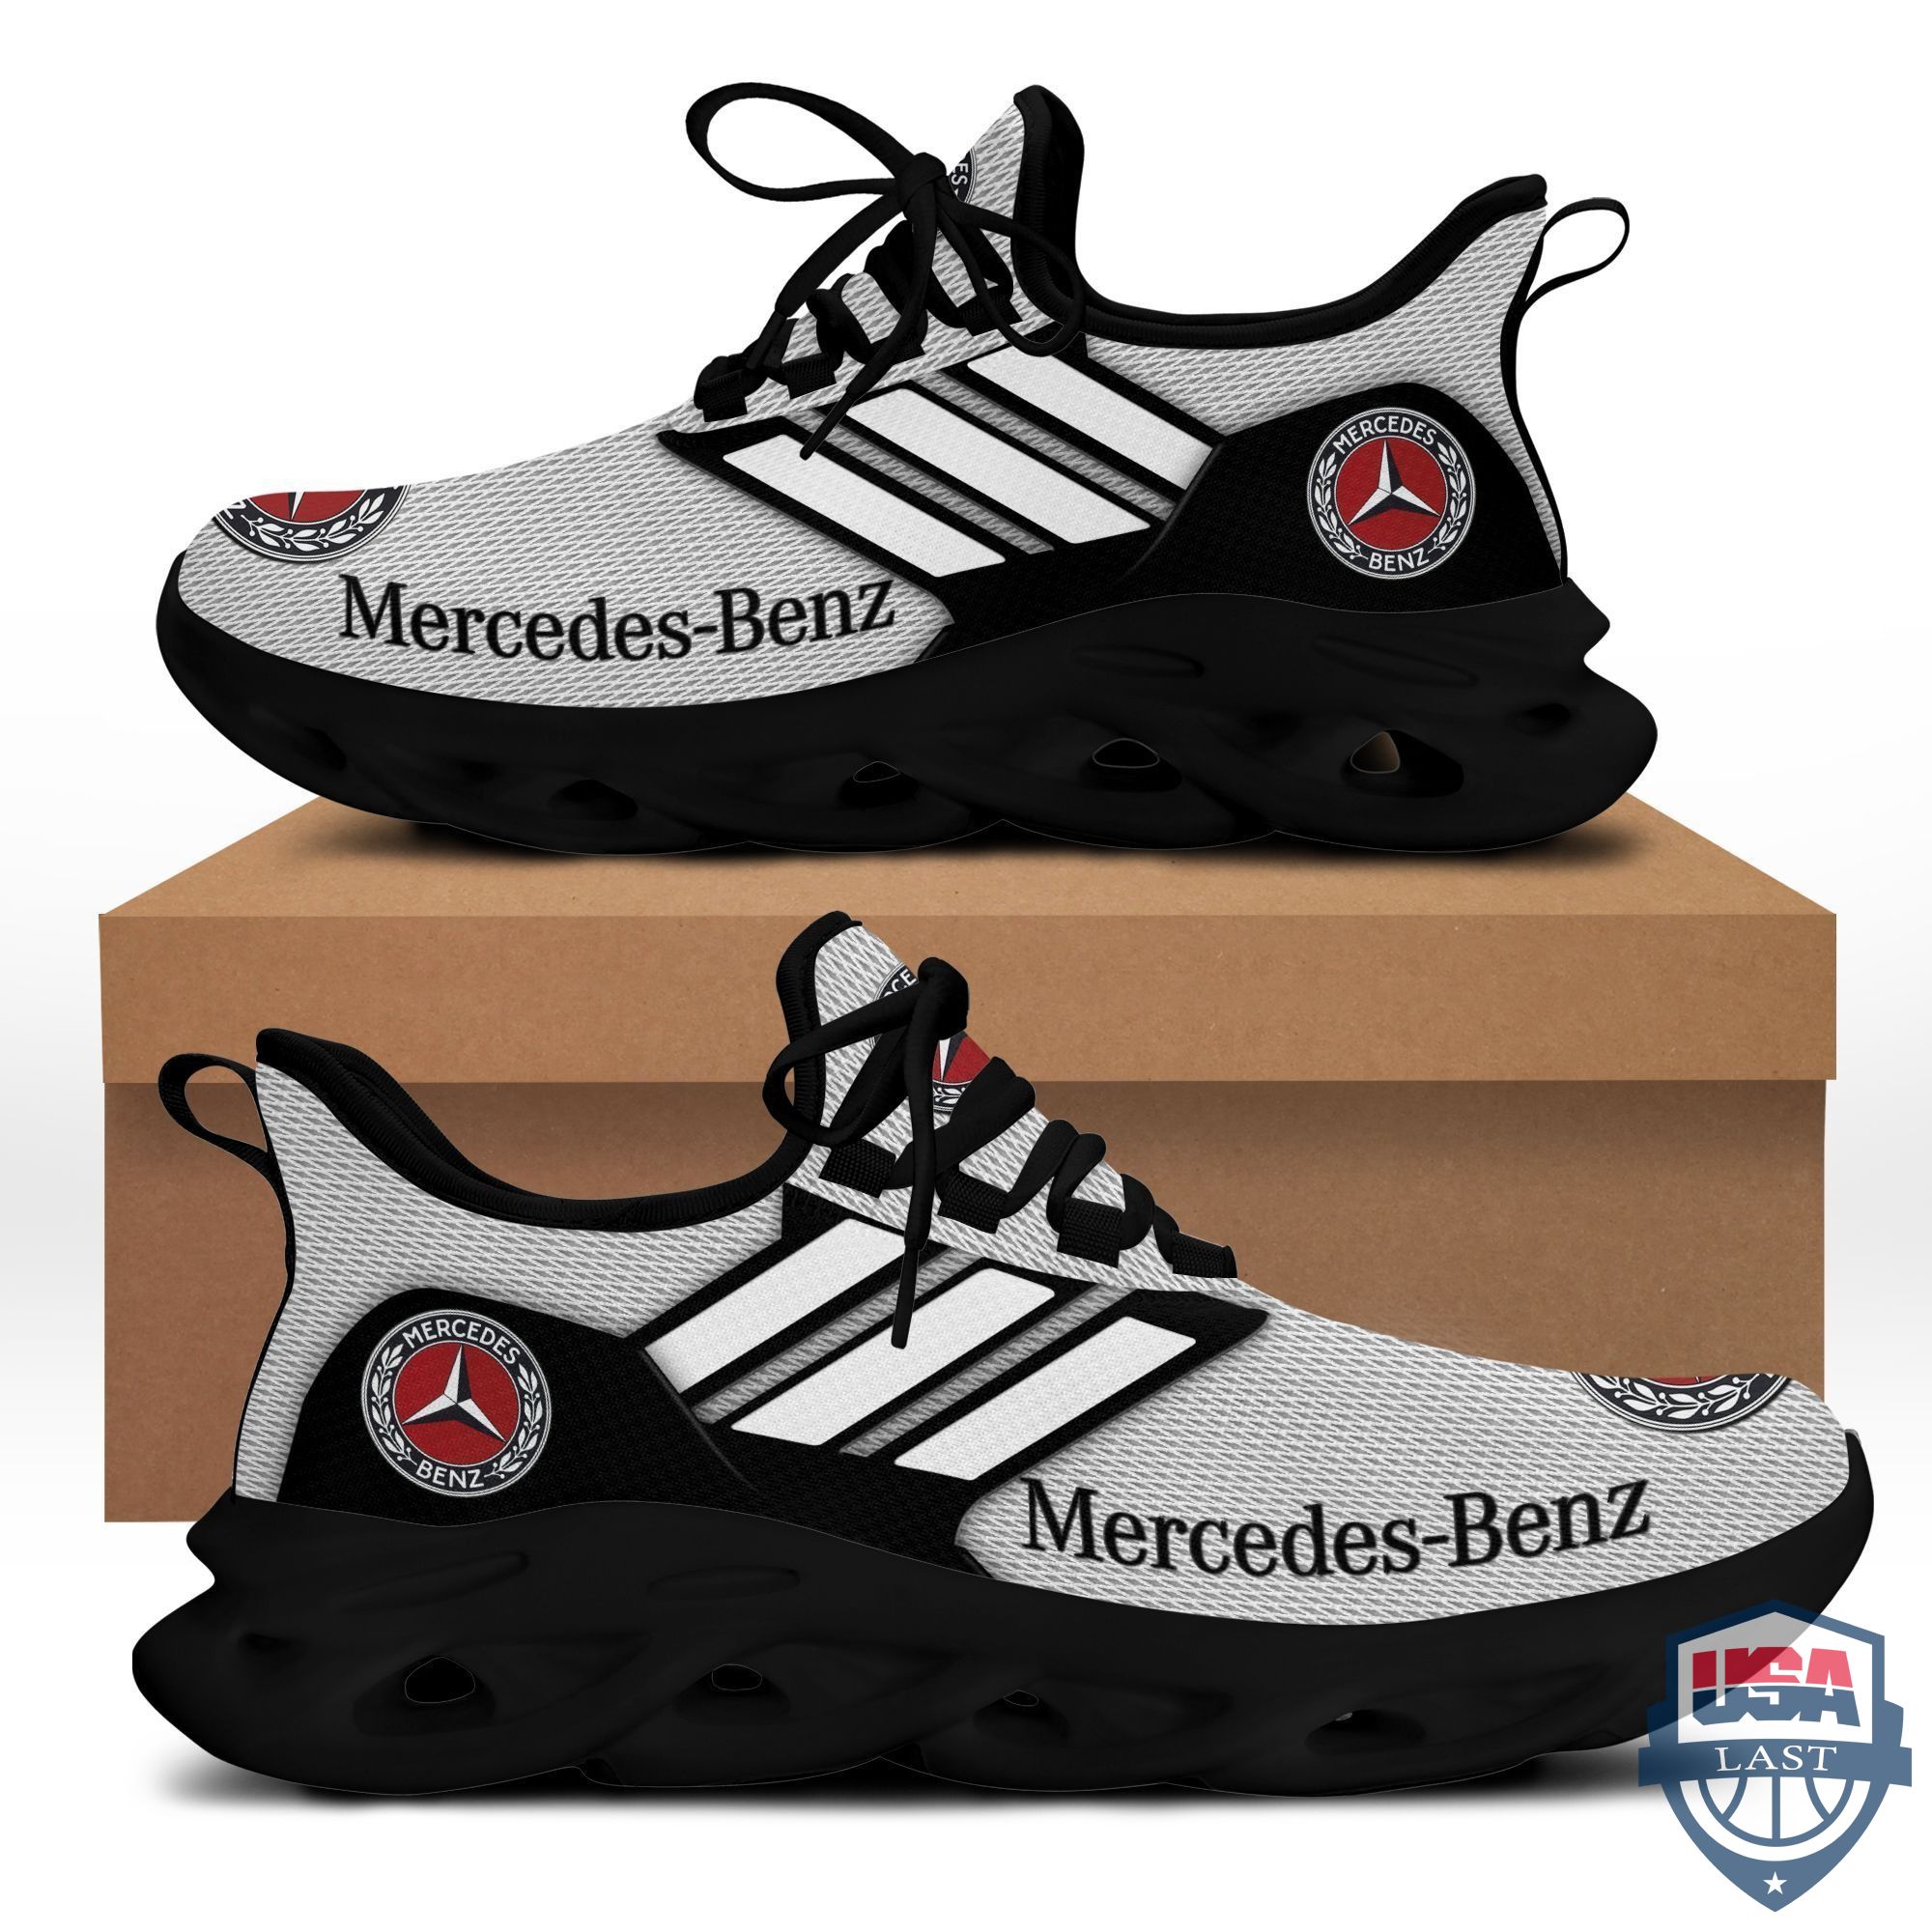 Top Trending – Mercedes Benz Max Soul Shoes Red Version